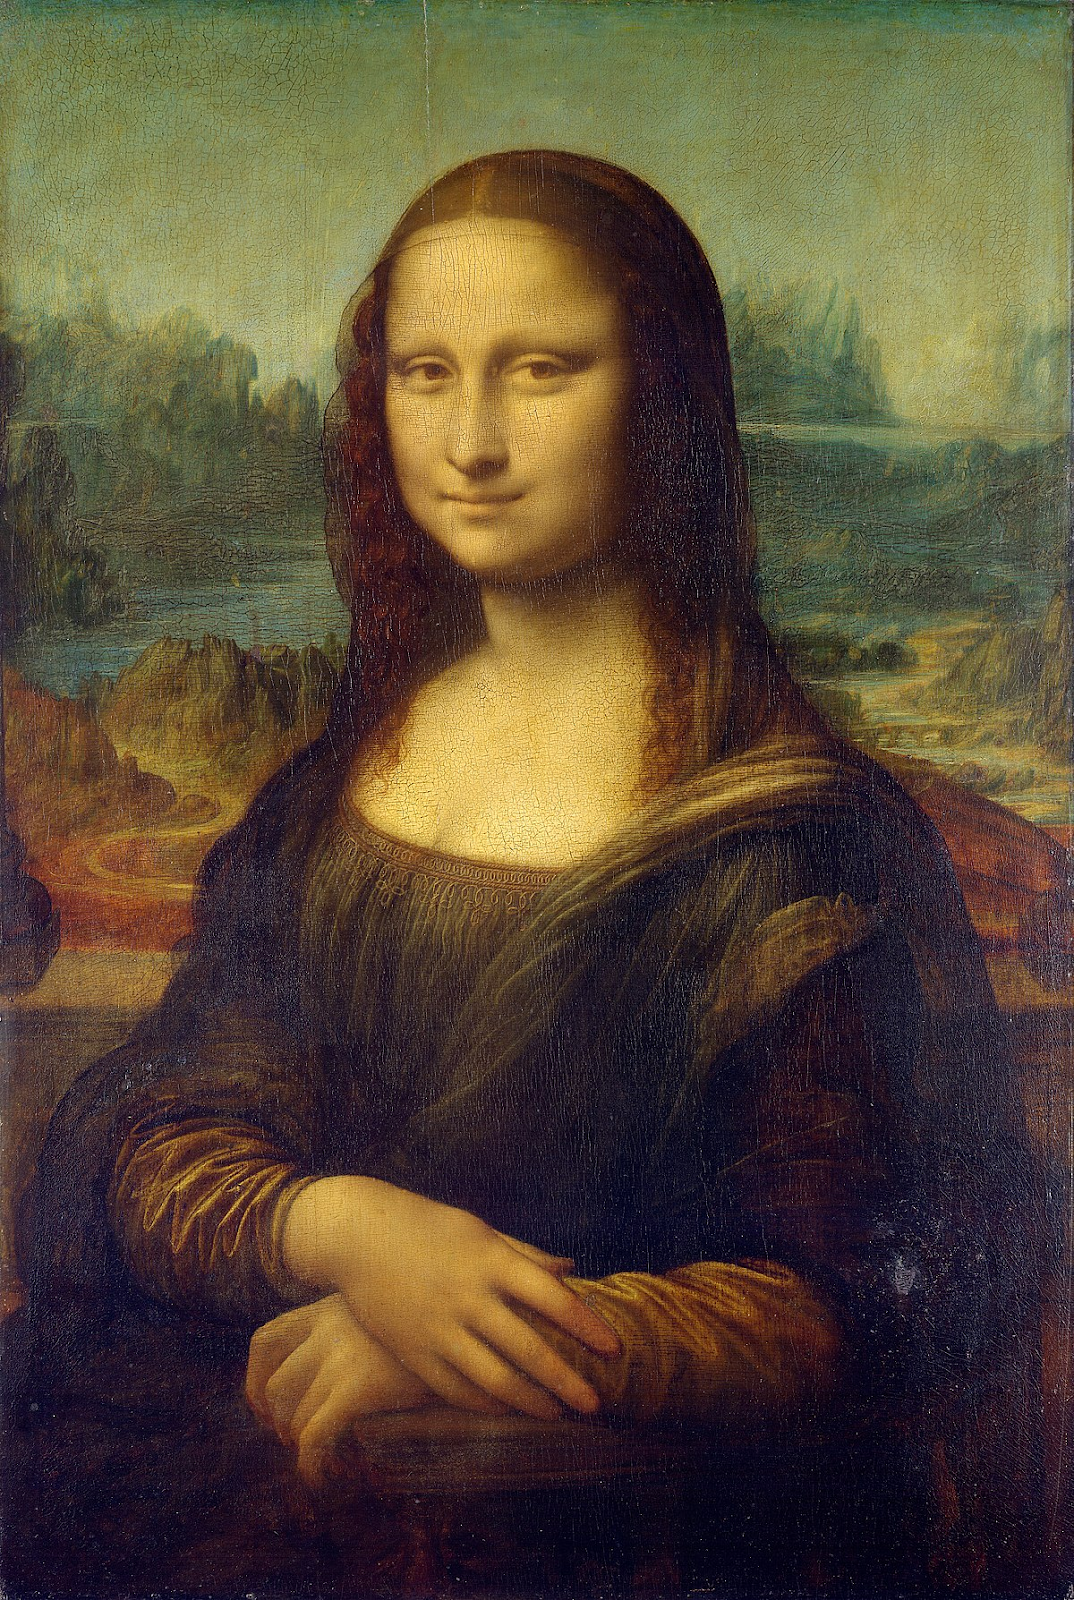 A painting of the Mona Lisa.